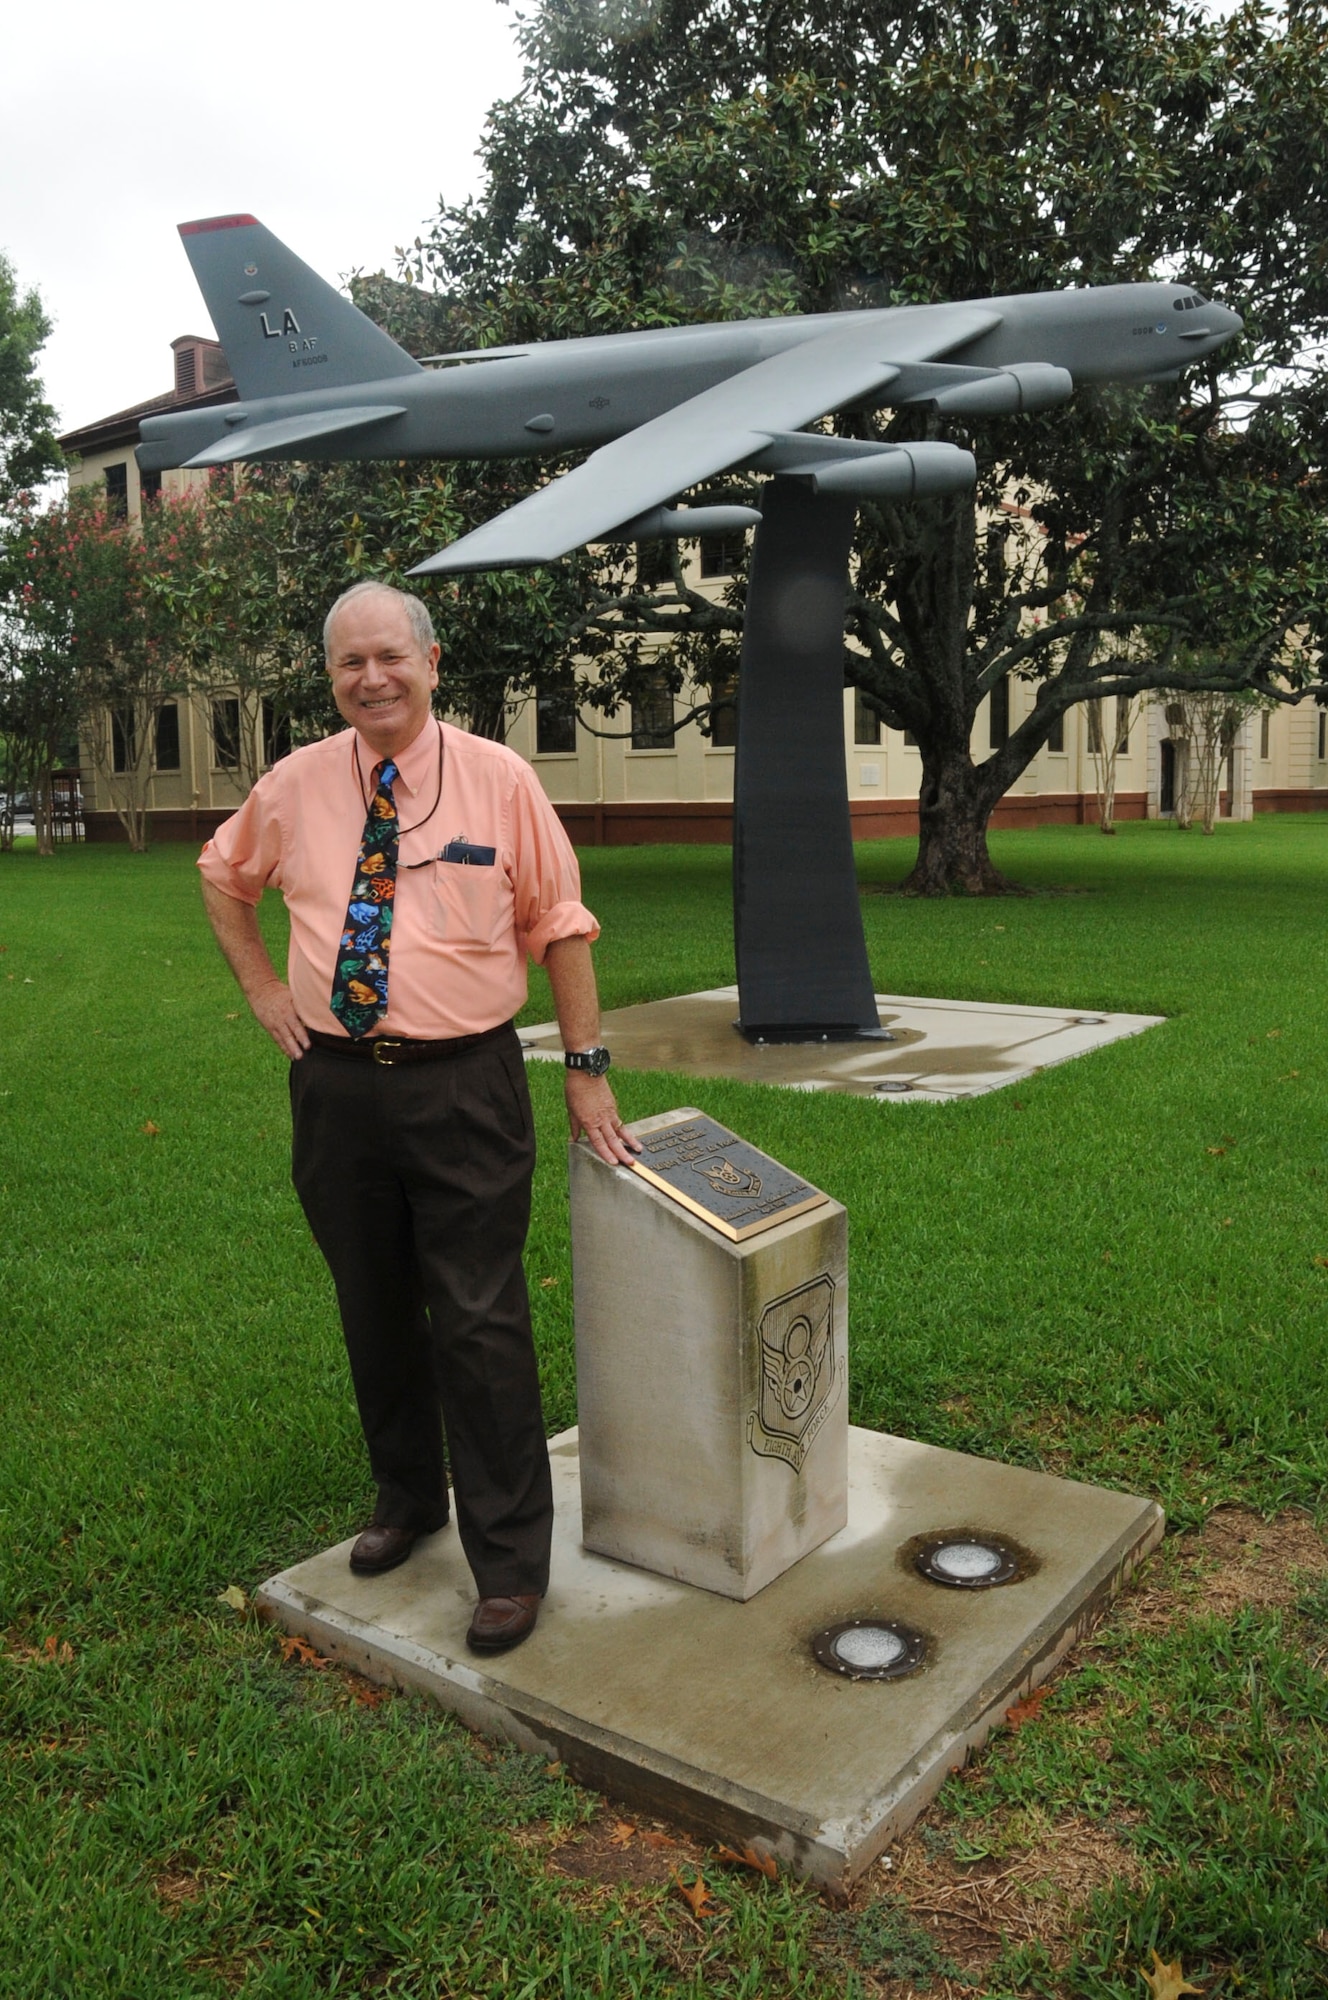 Ed Wempe stands beside the B-52 static display outside the Headquarters Eighth Air Force building at Barksdale AFB, La., Aug. 15, 2016, days before his retirement from the Intelligence career field. Wempe has produced countless numbers of targeting and threat analysis reports for B-52 aircrews throughout the span of a 45-year career. (U.S. Air Force photo by Amn Alexis Schultz)